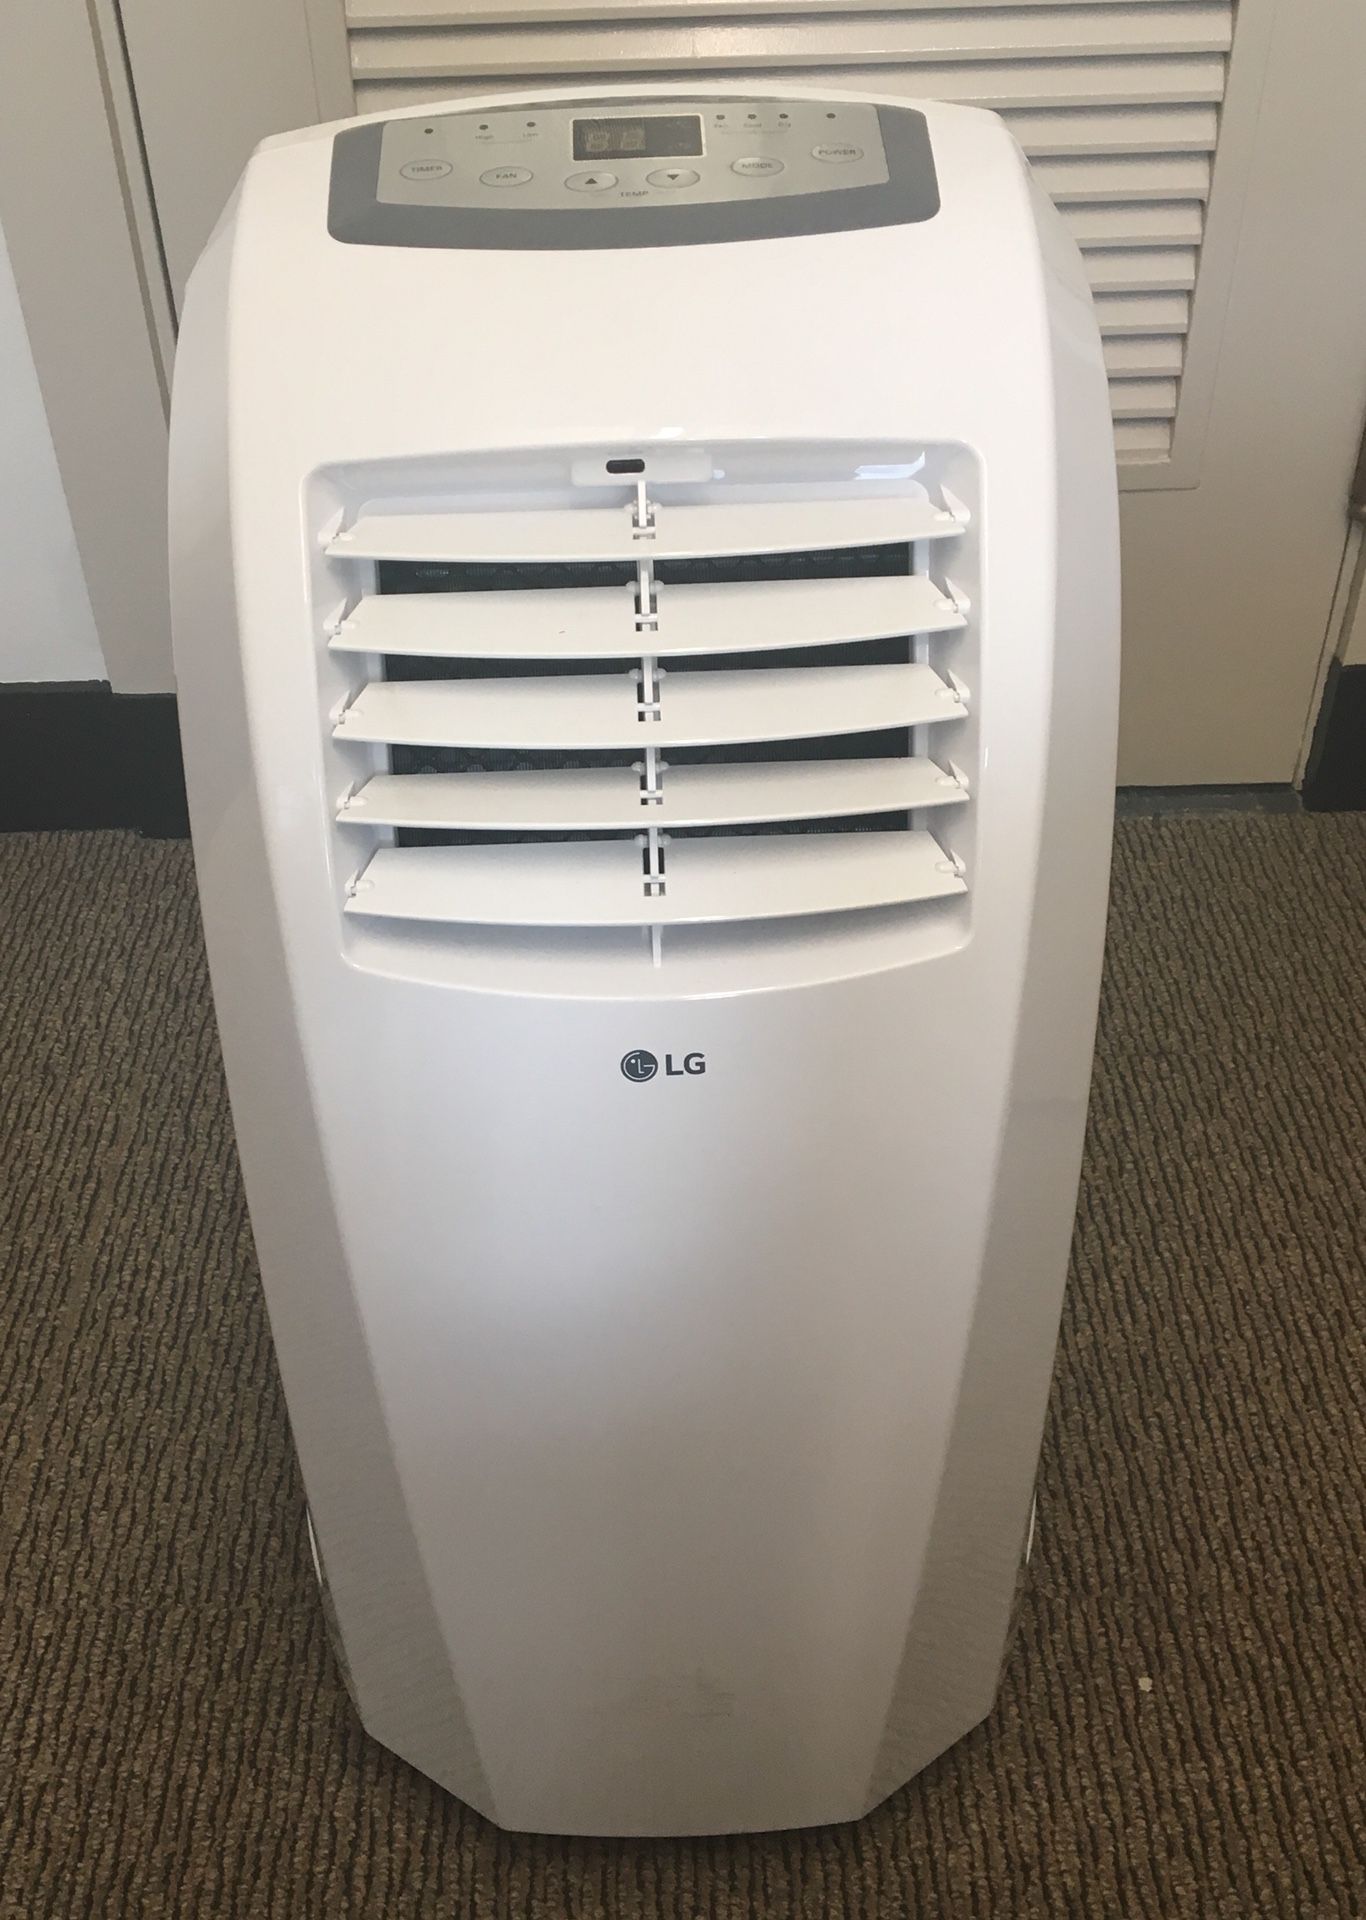 LG portable air conditioner - new